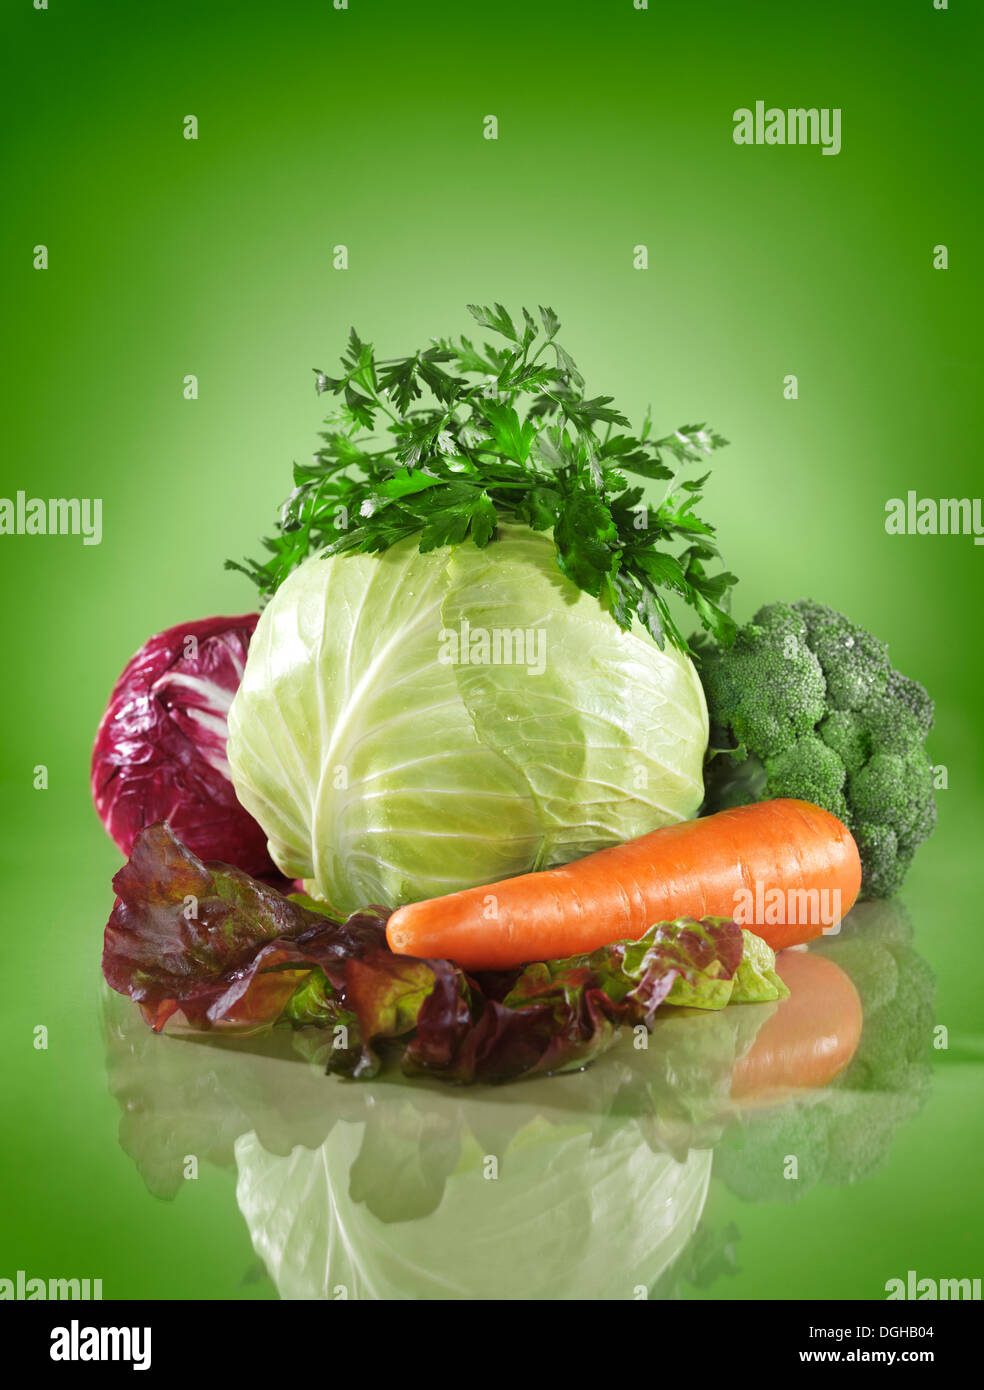 Colorful vegetable healthy food still life, cabbage and greens on green background Stock Photo